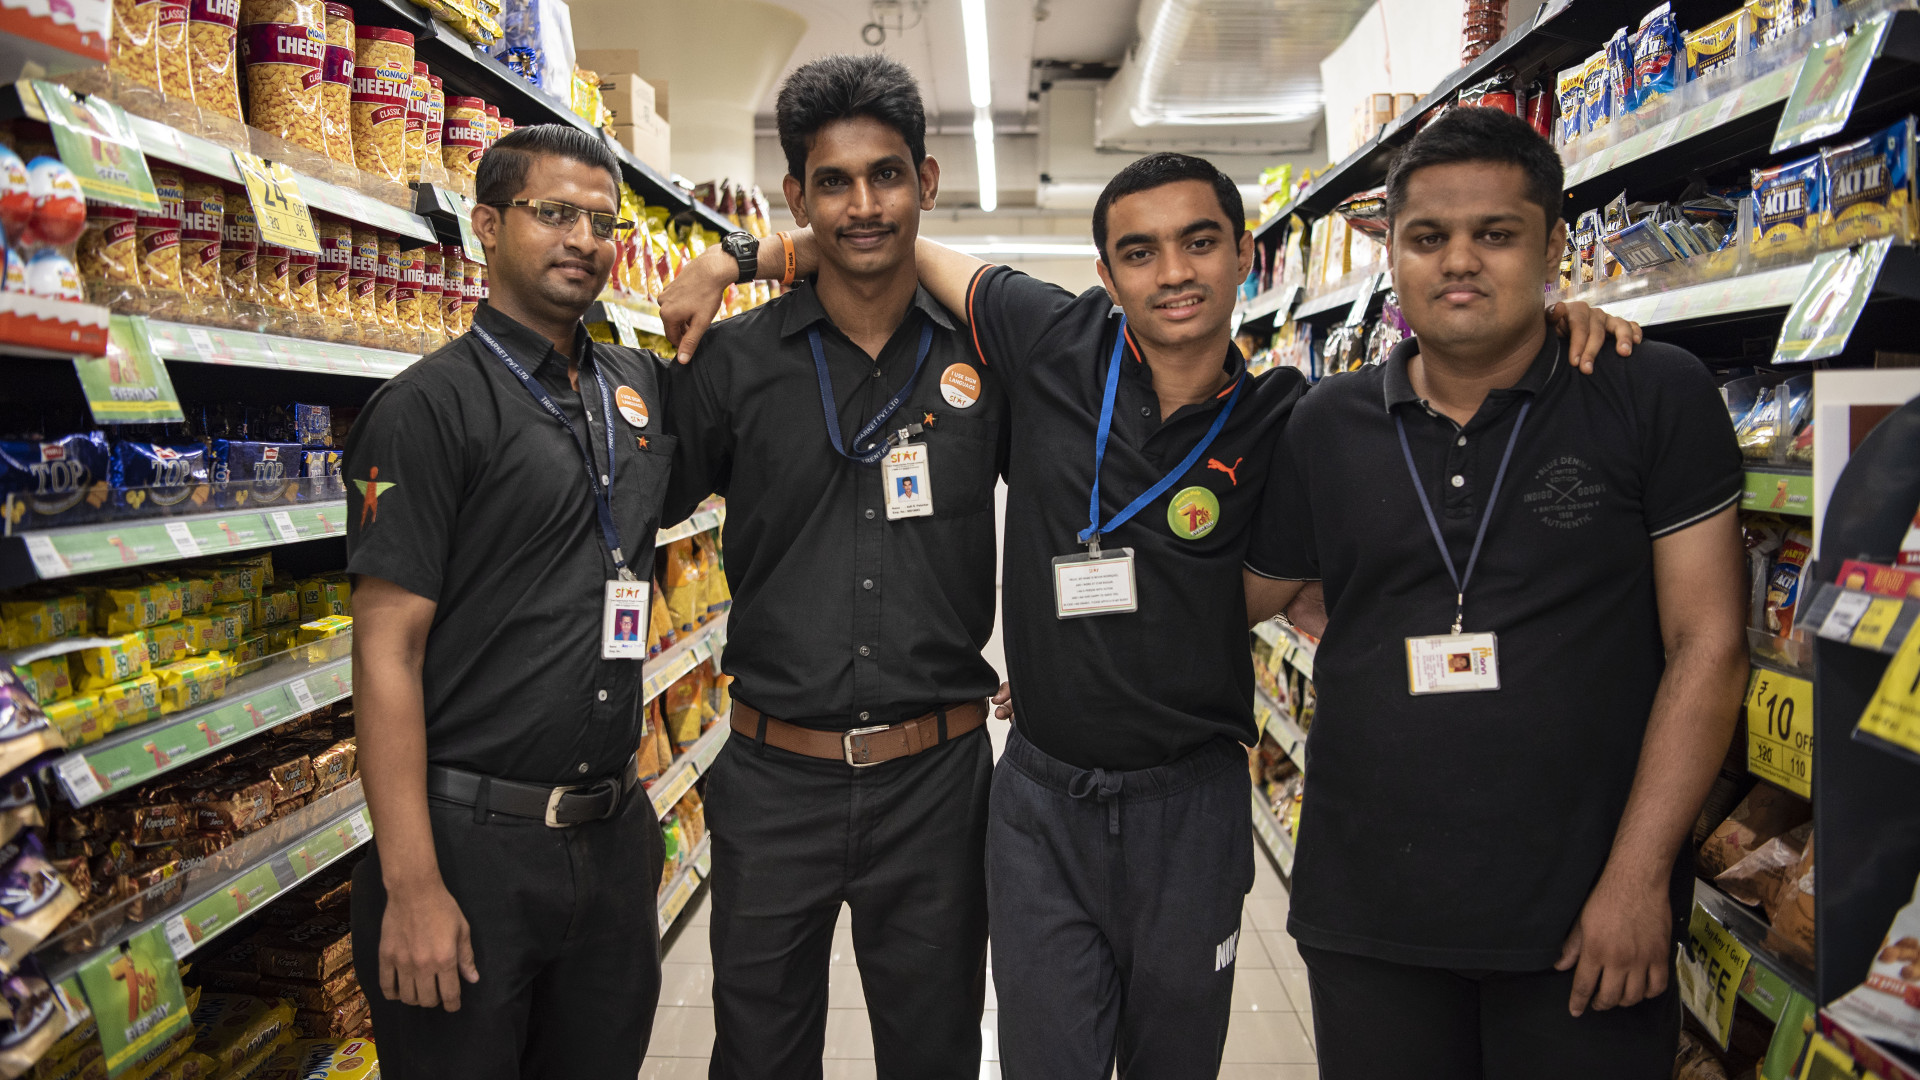 Diversity and inclusion at Trent Hypermarket